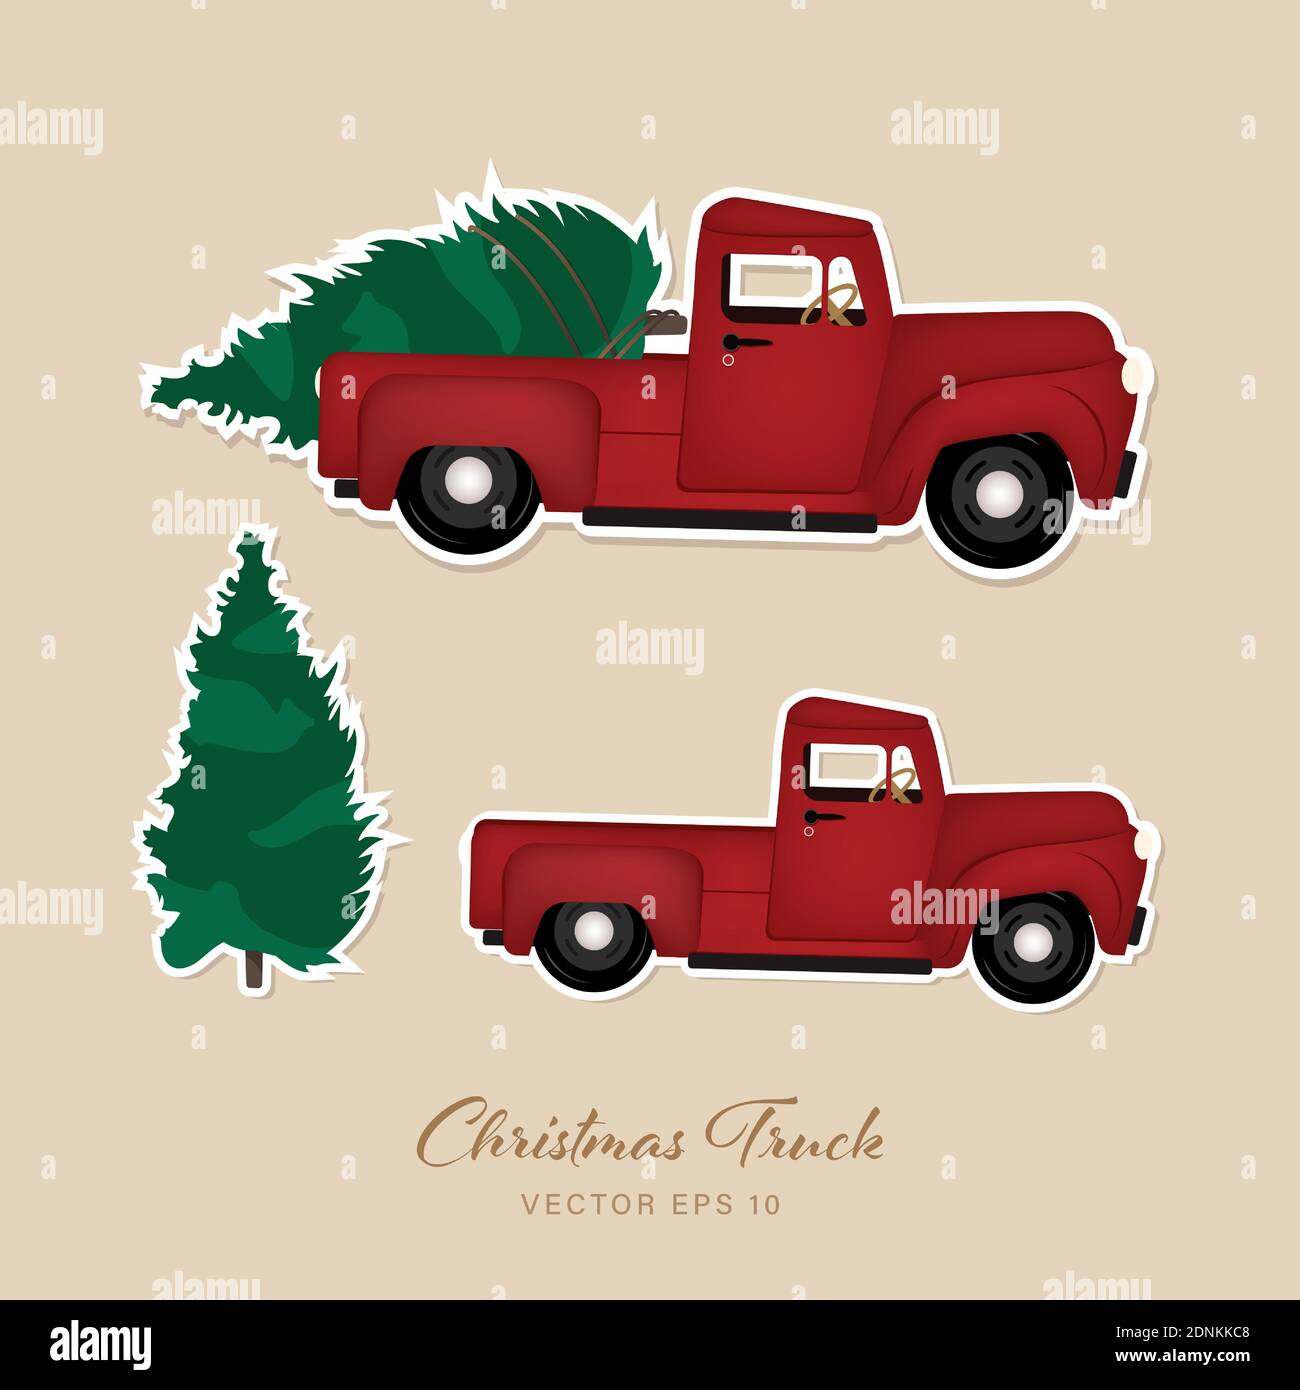 Red Christmas tree truck vector file for digital sticker, clipart etc. Stock Vector